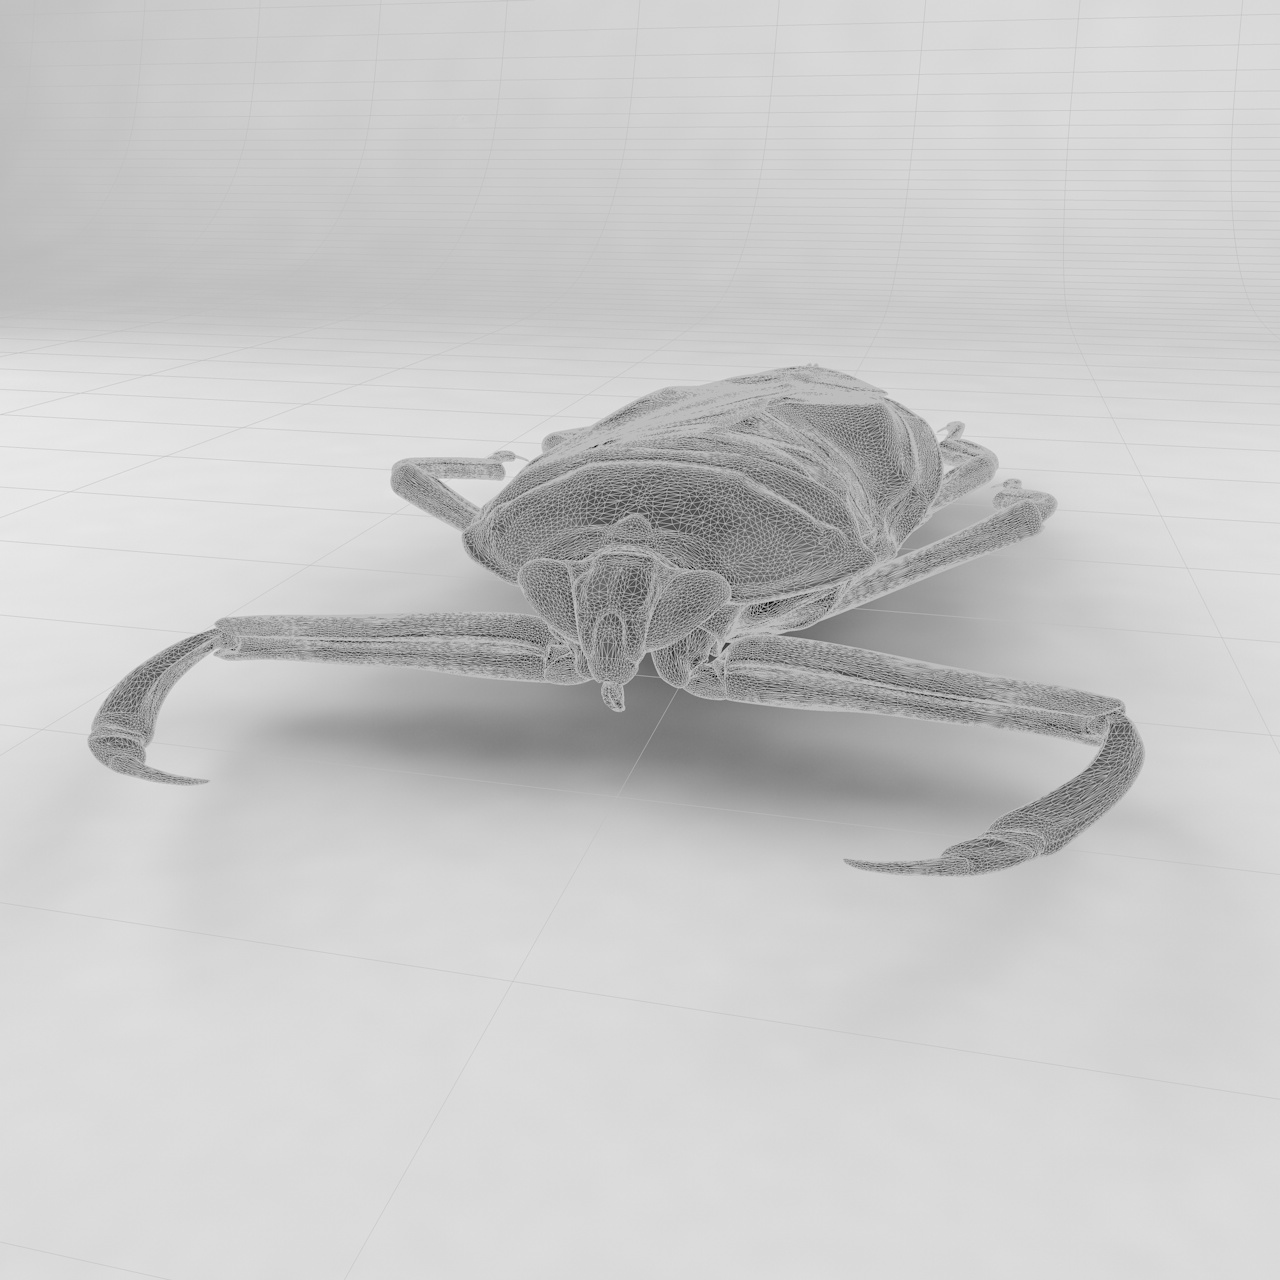 Giant water bug insect beetles 3d model